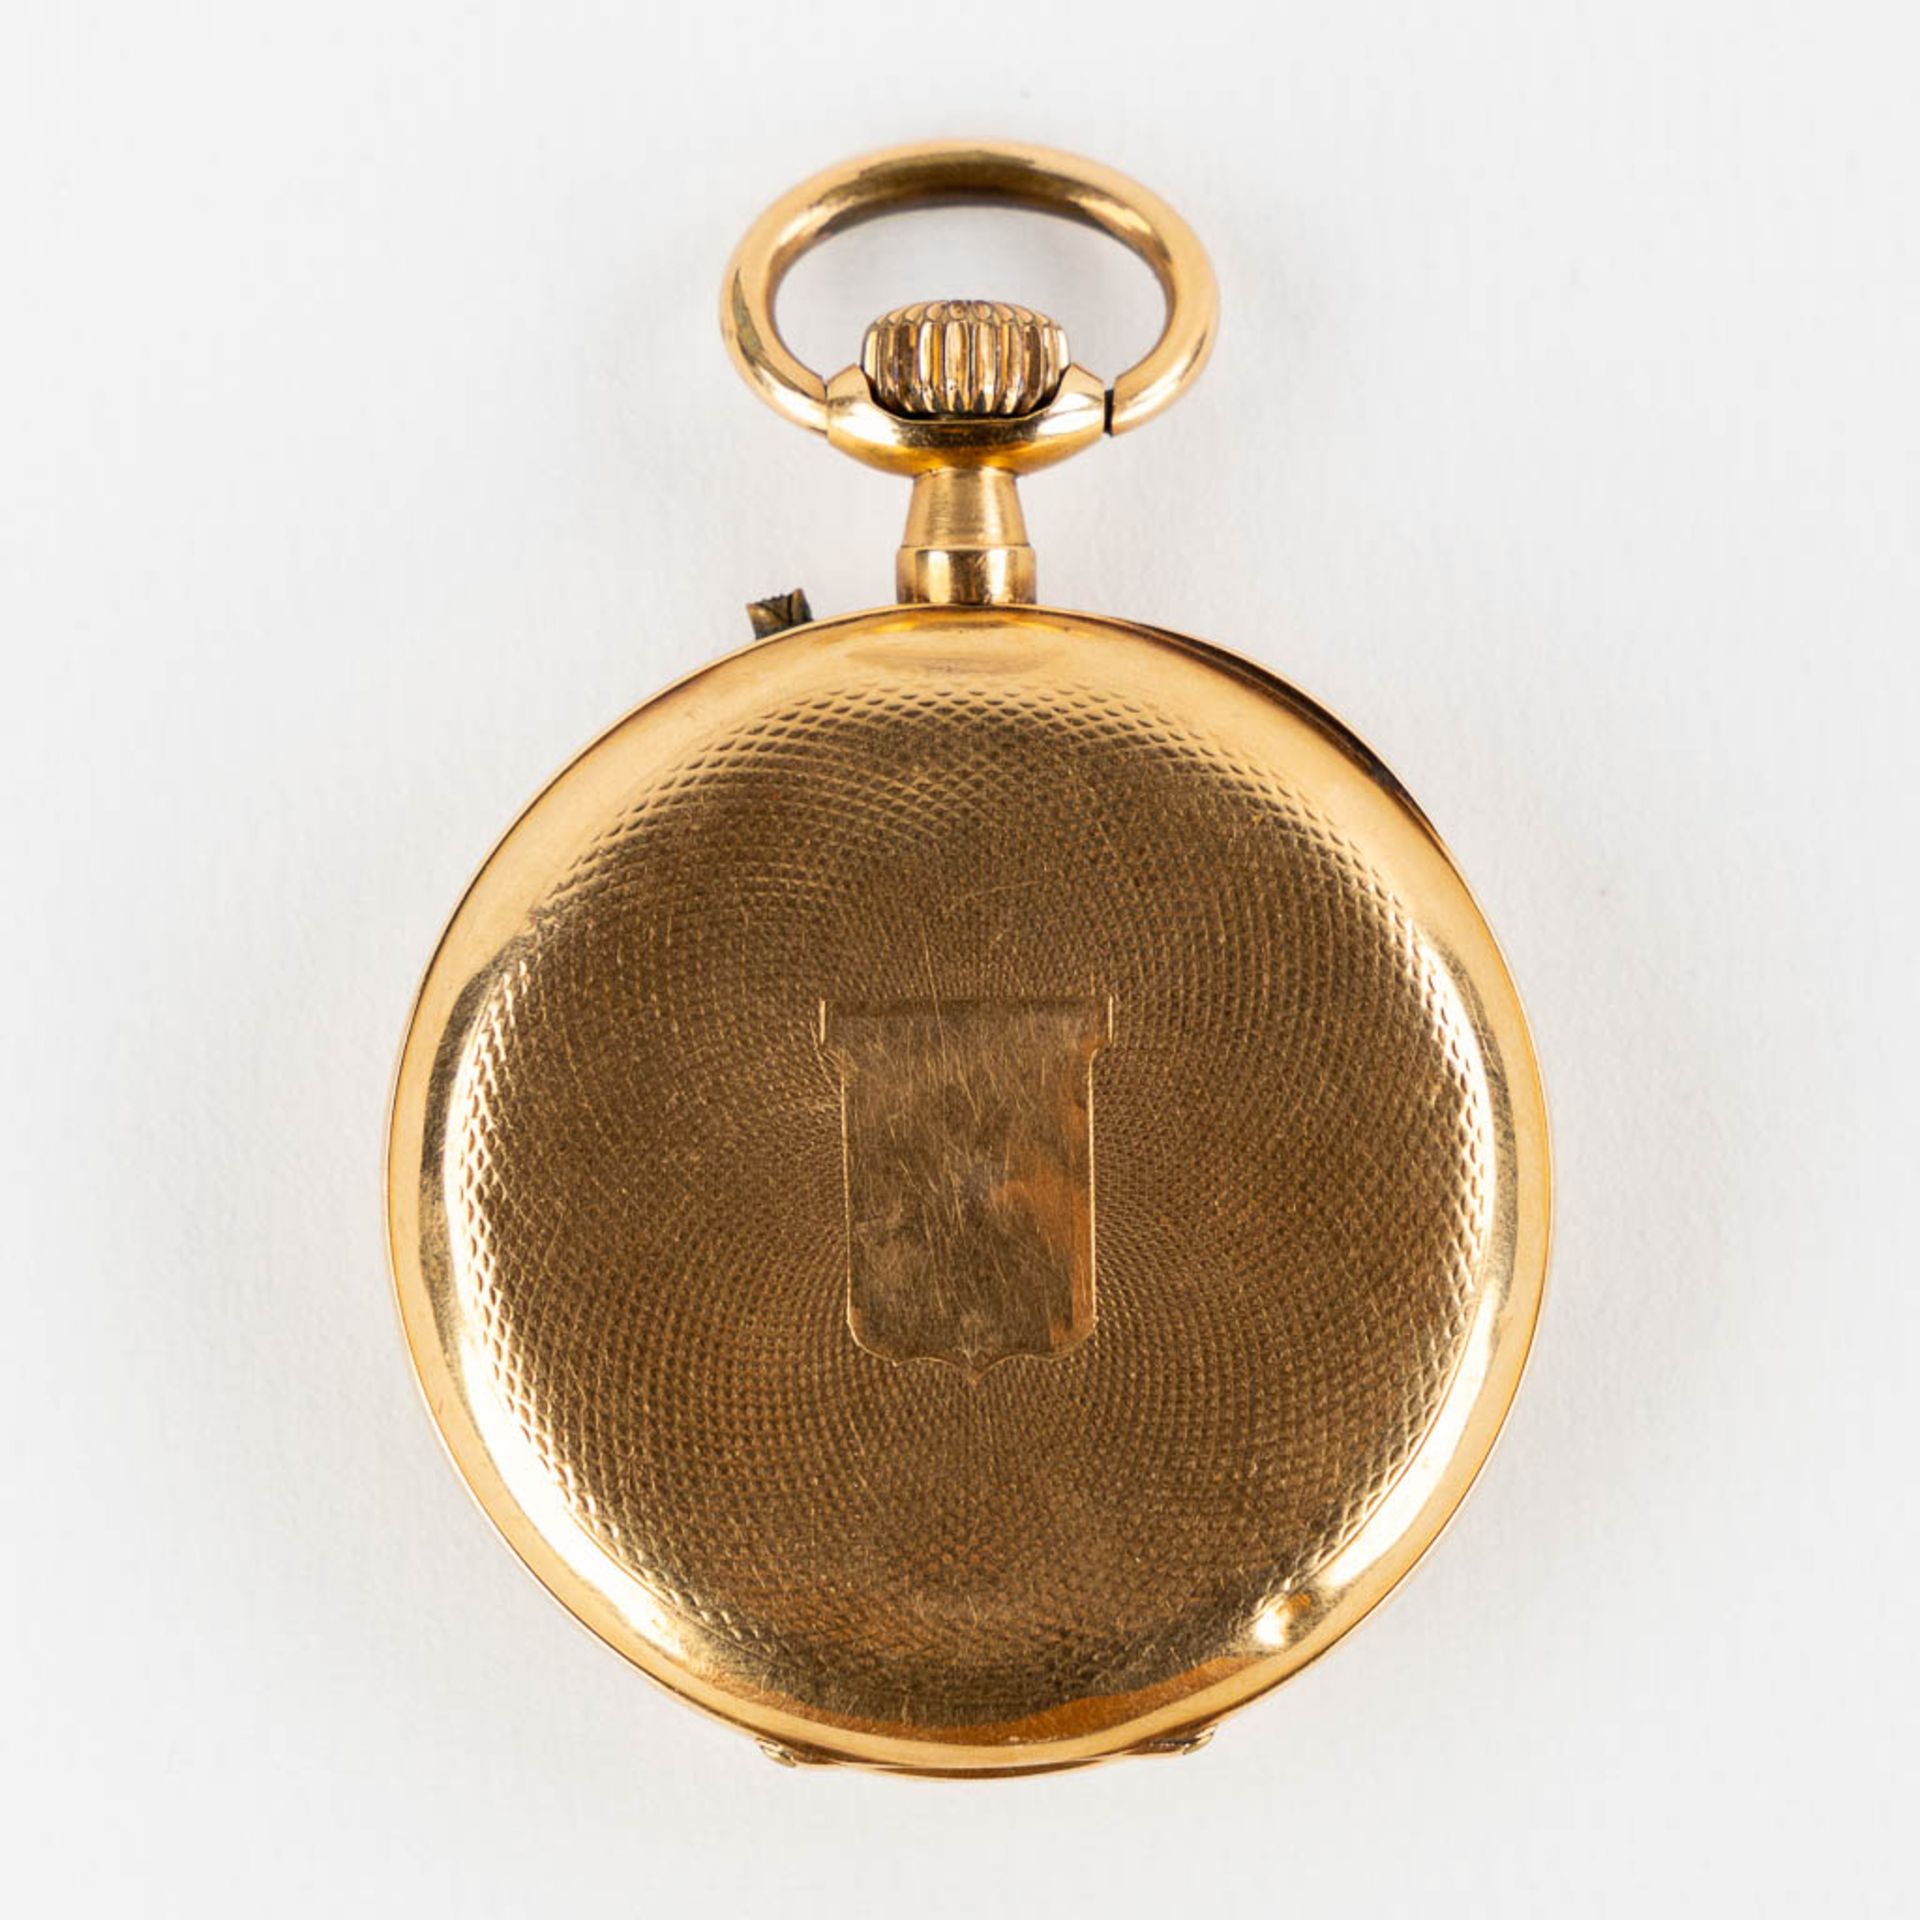 An antique pocket watch, 18kt yellow gold with a white enamel dial. (H:6,3 x D:4,3 cm) - Image 7 of 10